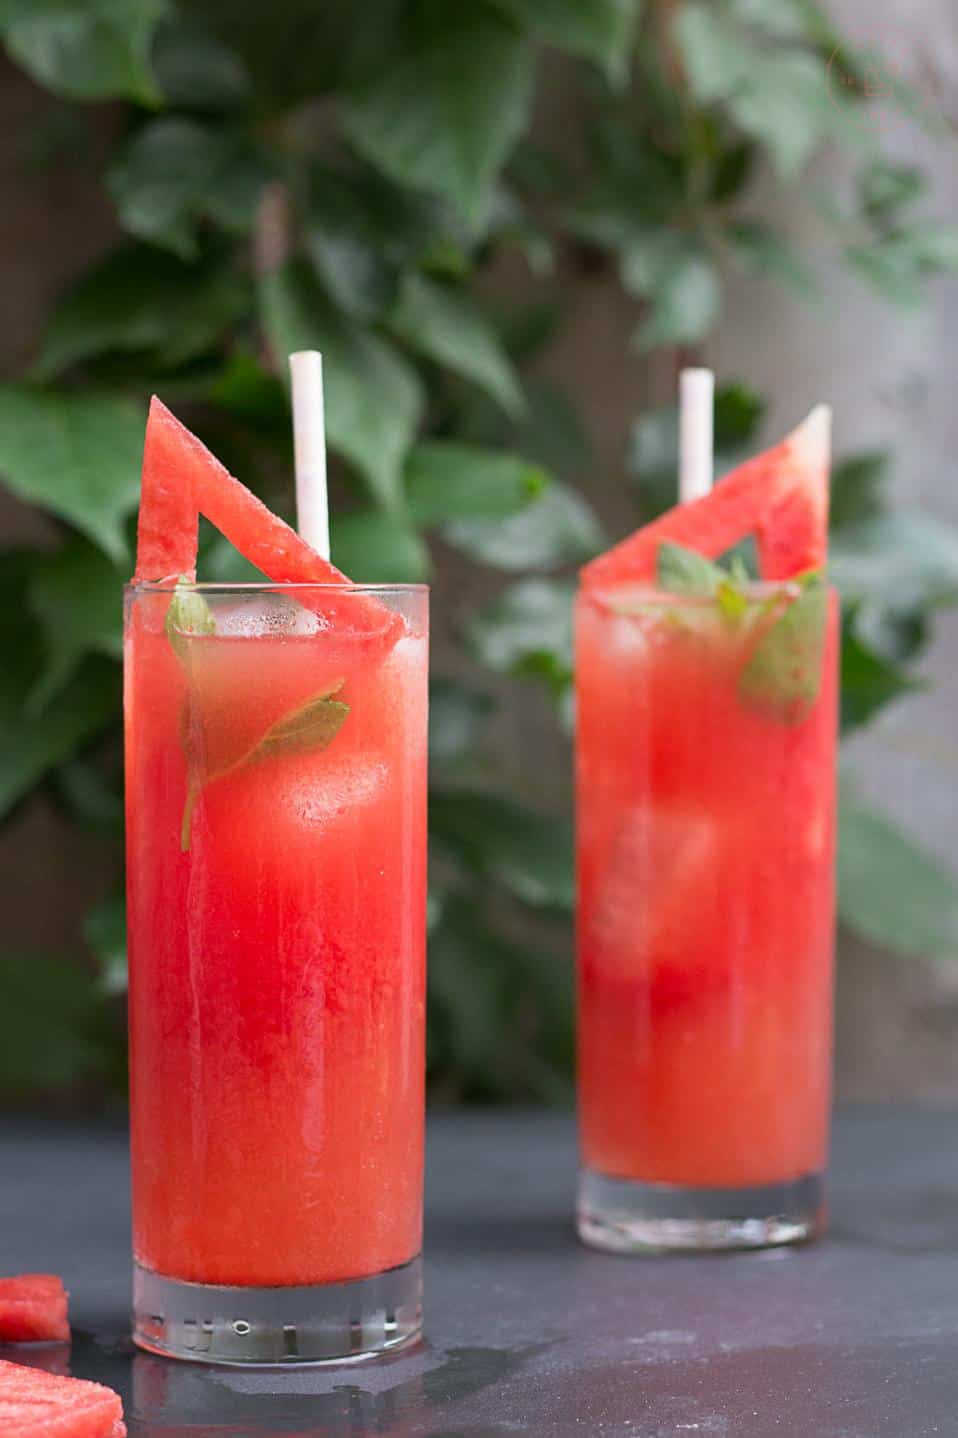  Enjoy the sweetness of watermelon in every sip.